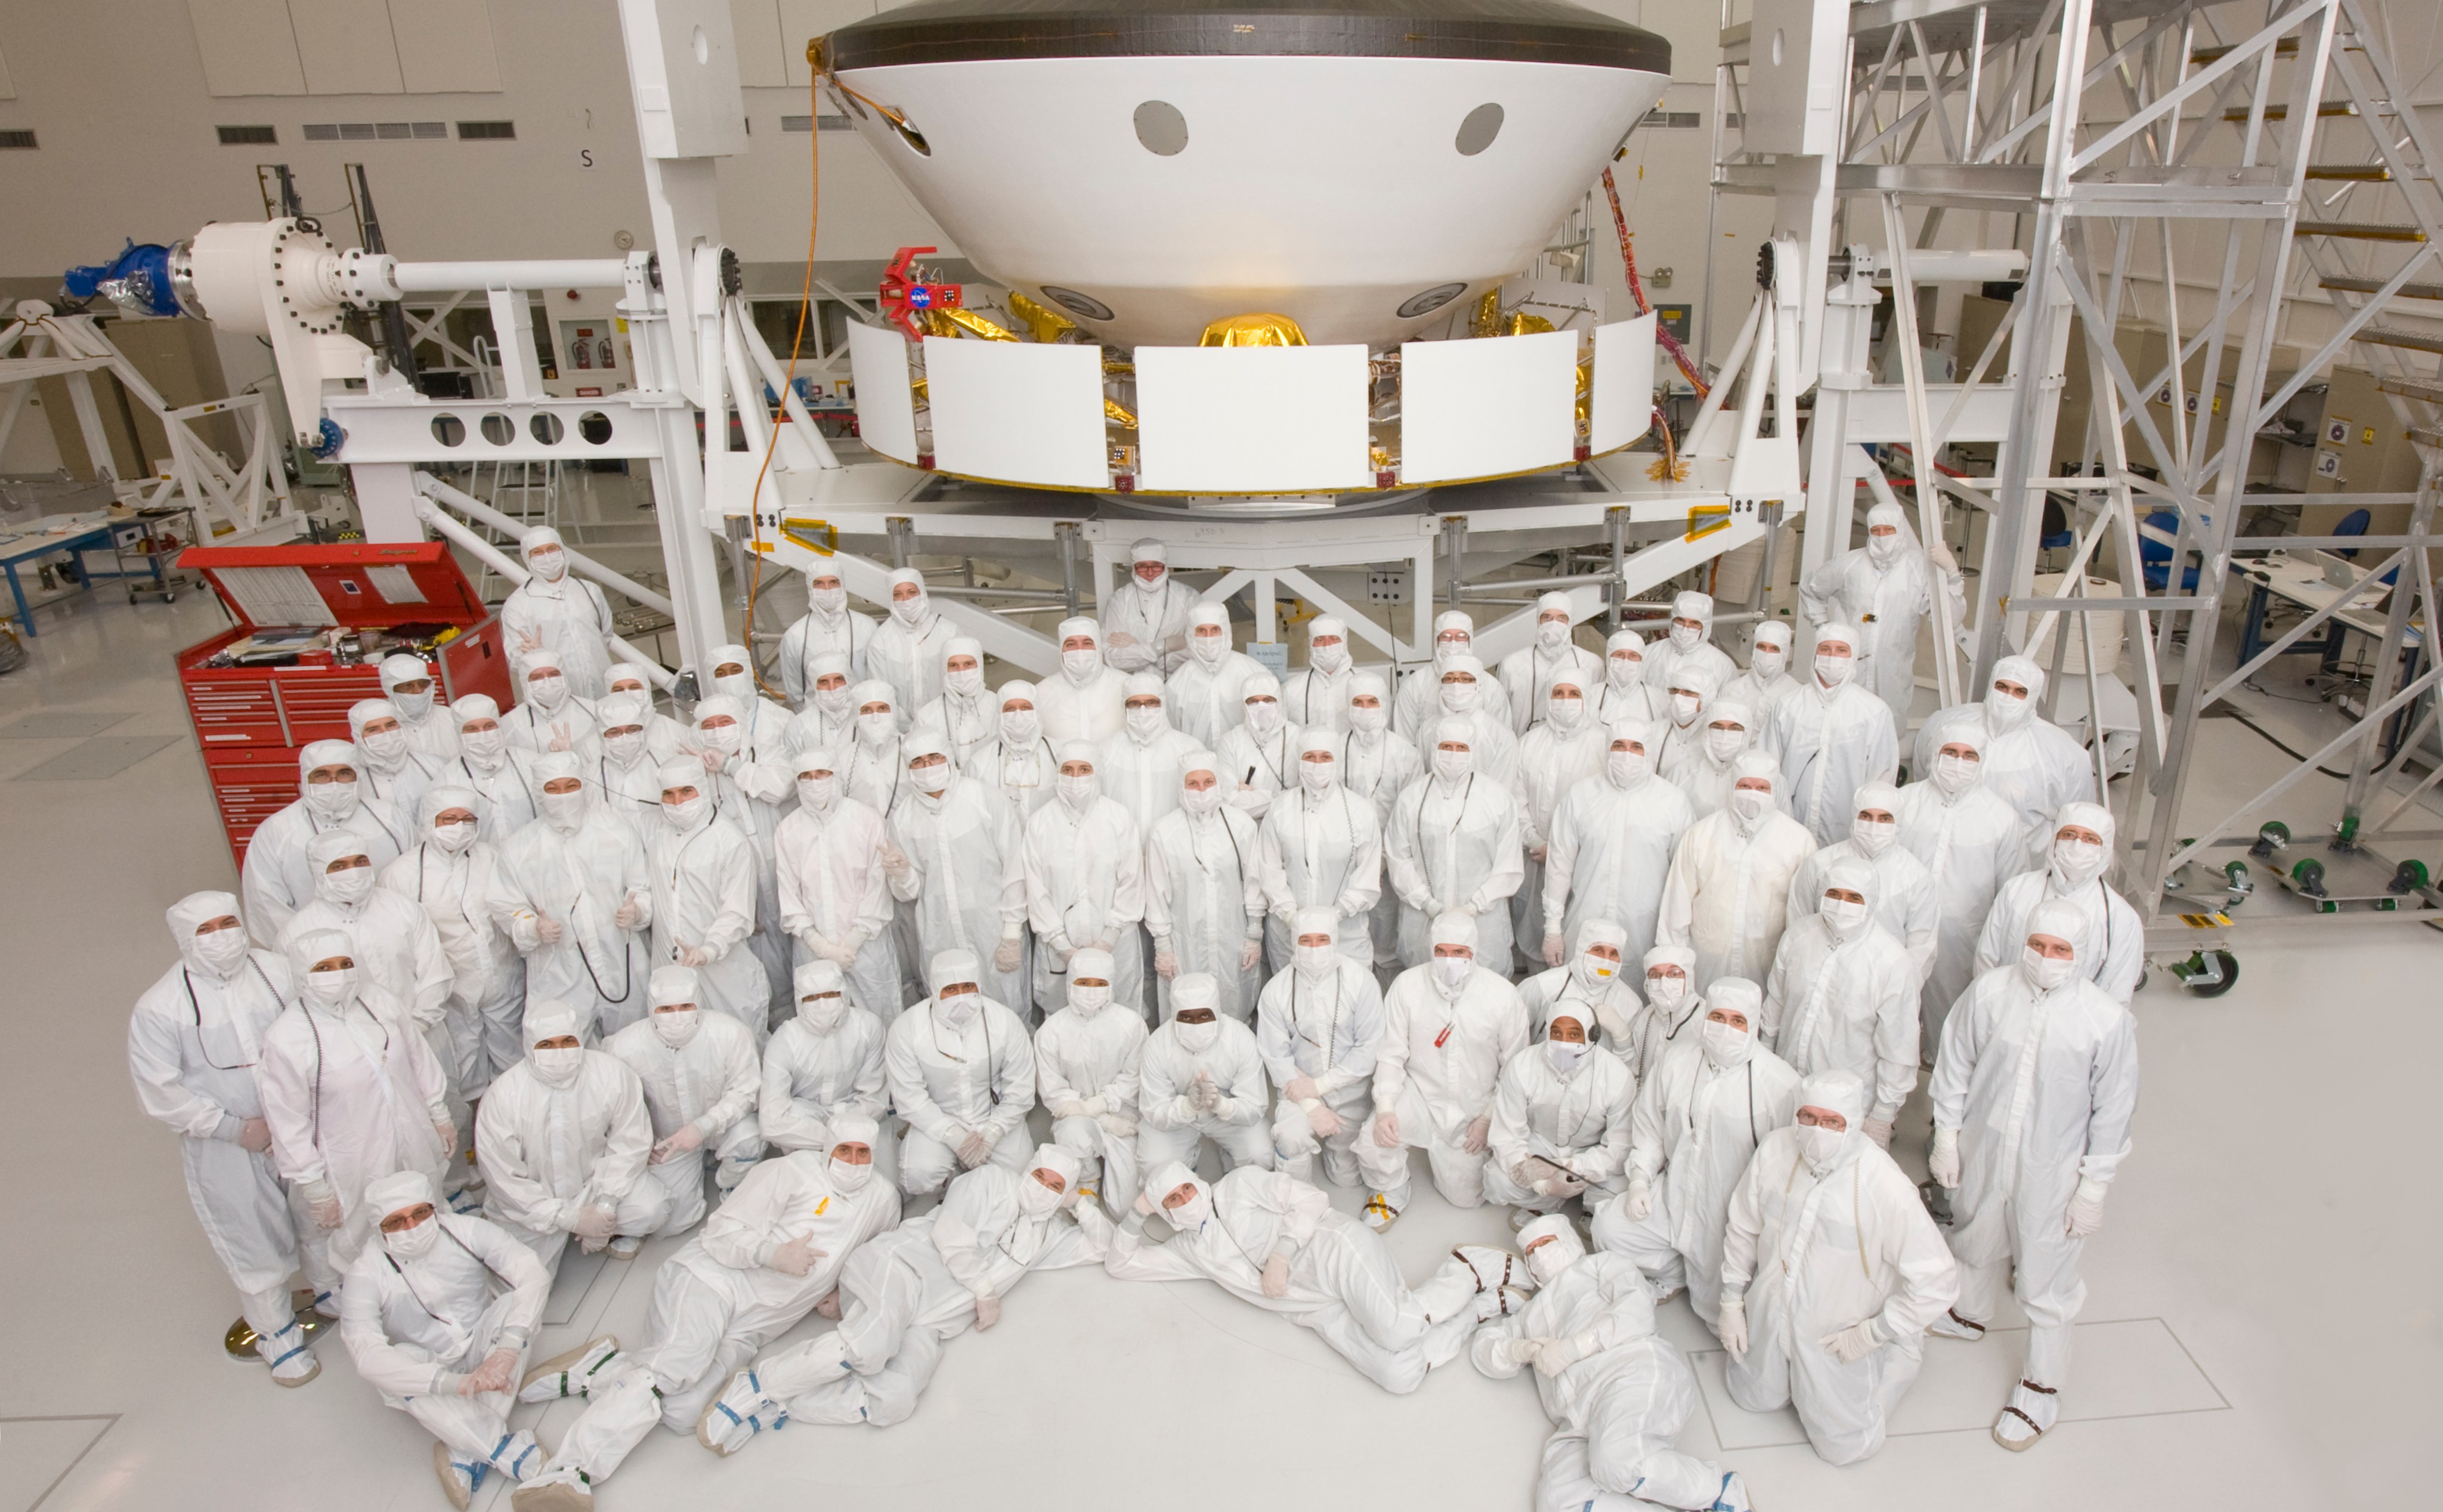 This photo shows 70 members of the Mars Science Laboratory team in Jet Propulsion Laboratory's Spacecraft Assembly Facility after they have prepared the spacecraft to go to a different area for the environmental tests.  The team members are dressed in "bunny suits" (white protective gear) and are positioned in various poses in front of the spacecraft.